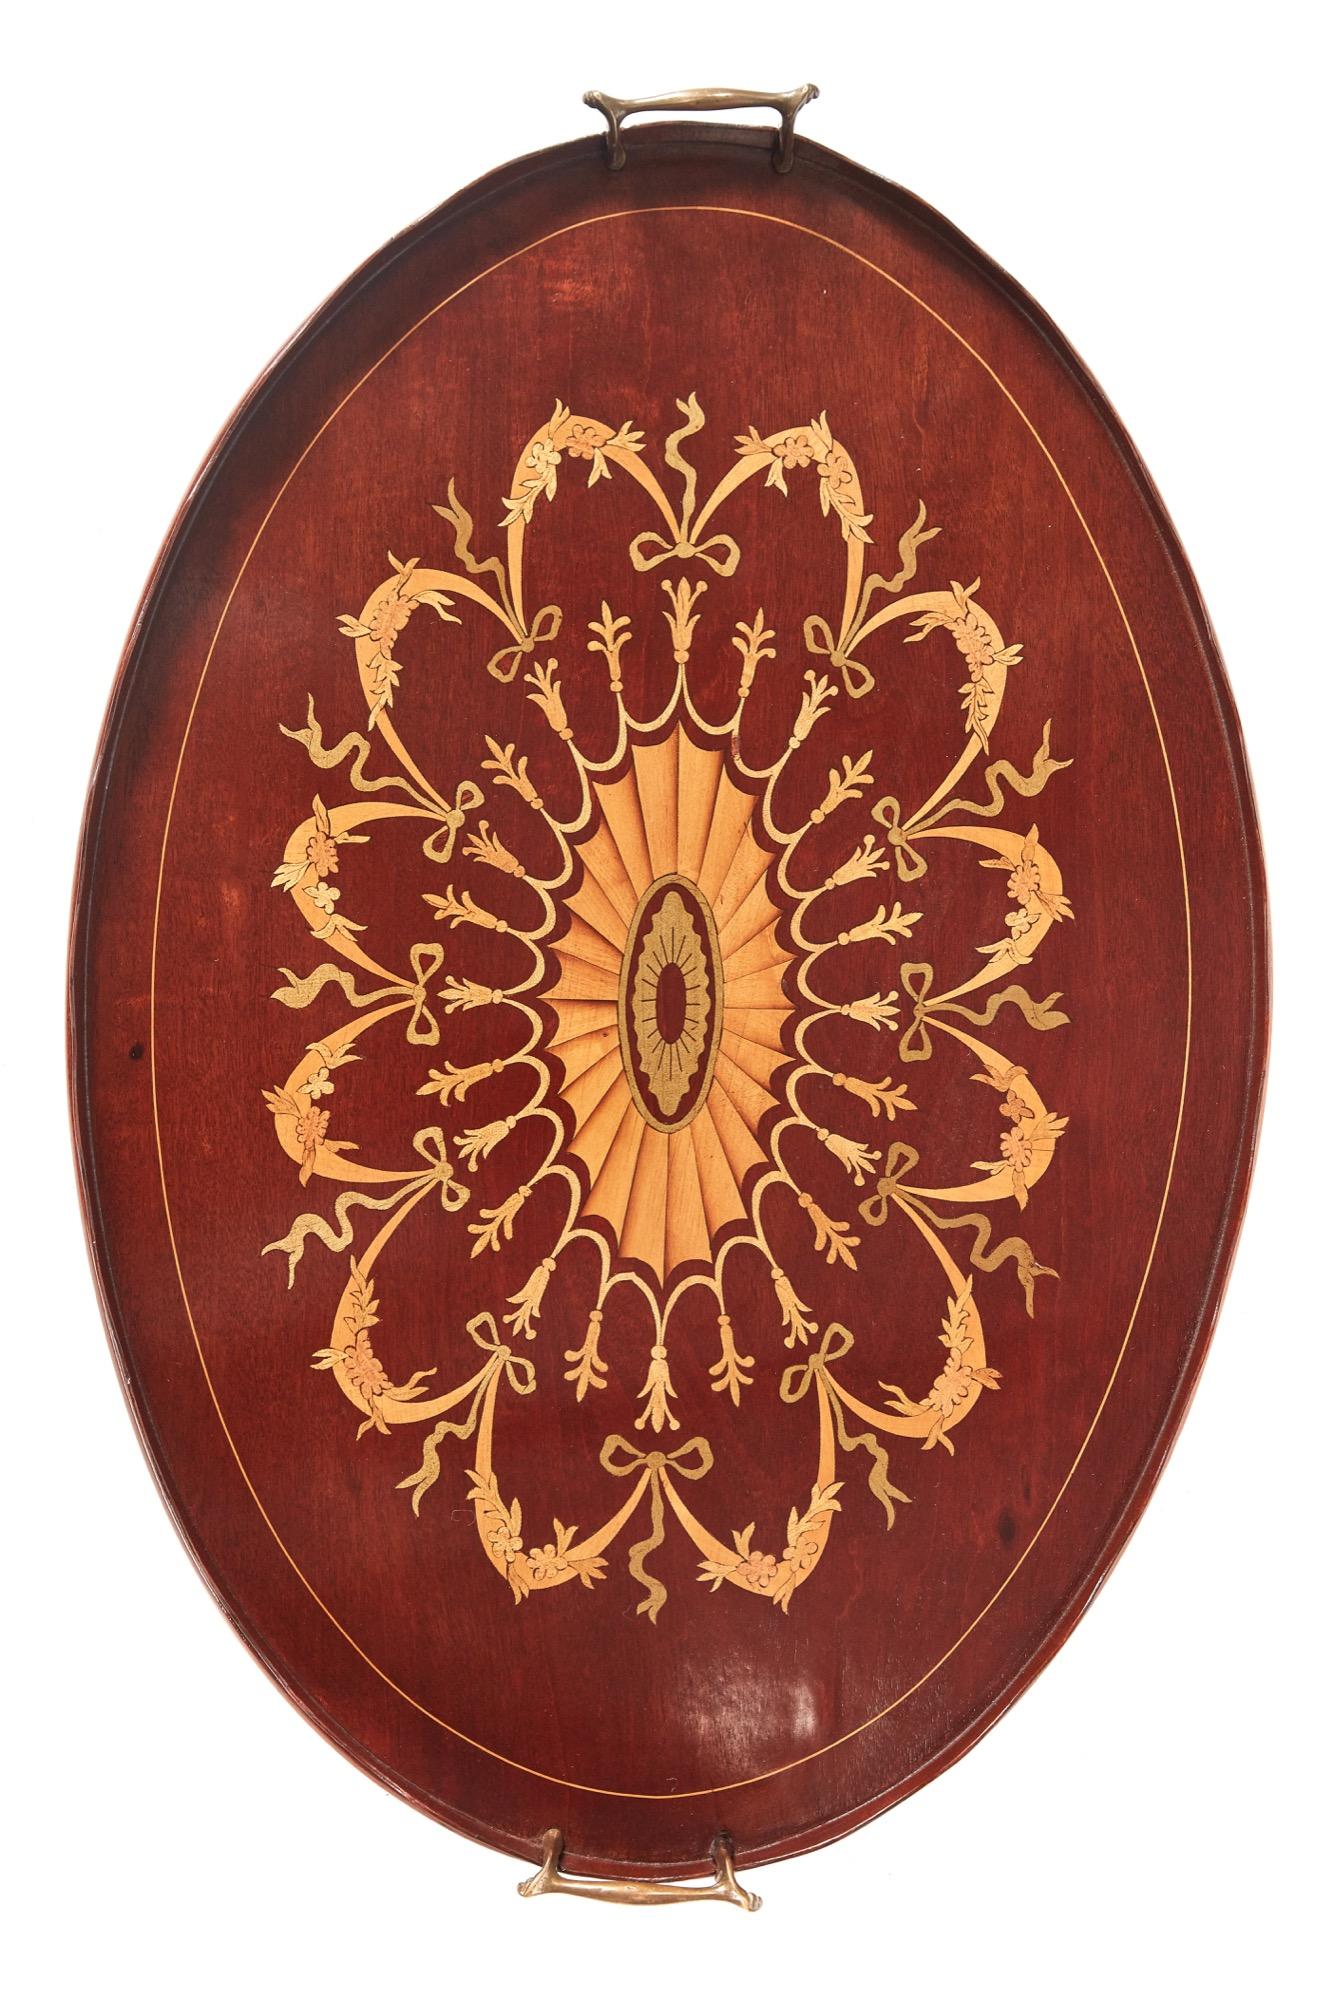 Outstanding quality Edwardian inlaid mahogany oval tray with original brass handles. It has a striking intricate inlaid centre with garlands around a large shell.


 